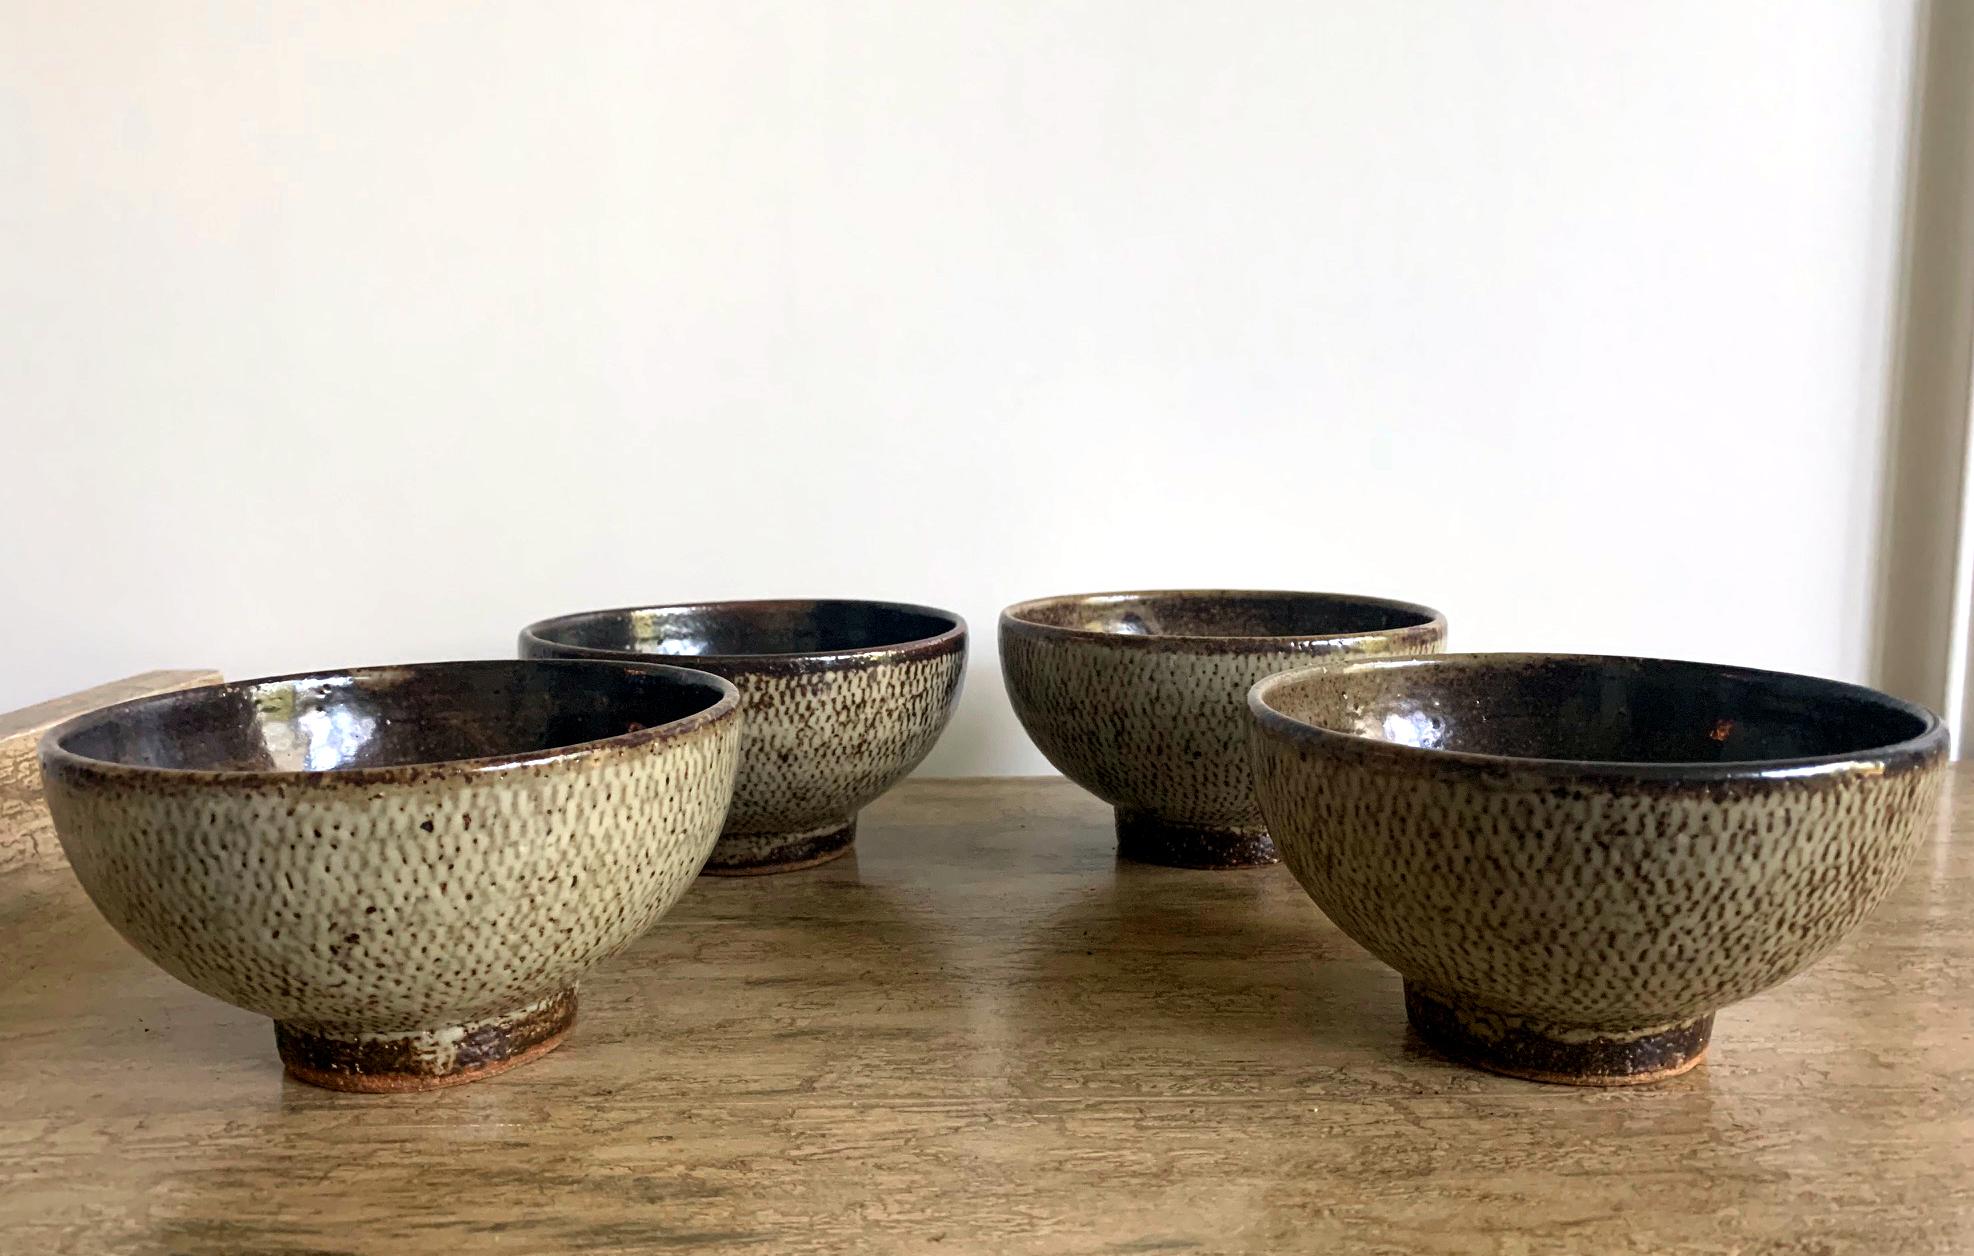 A set of five Japanese ceramic bowls by Tatsuzo Shimaoka (?? ??; 1919-2007), an important member in Japanese Mingei Folk Art movement. The collection consists of a matching set of four tea bowls and an additional one of a different shape but same